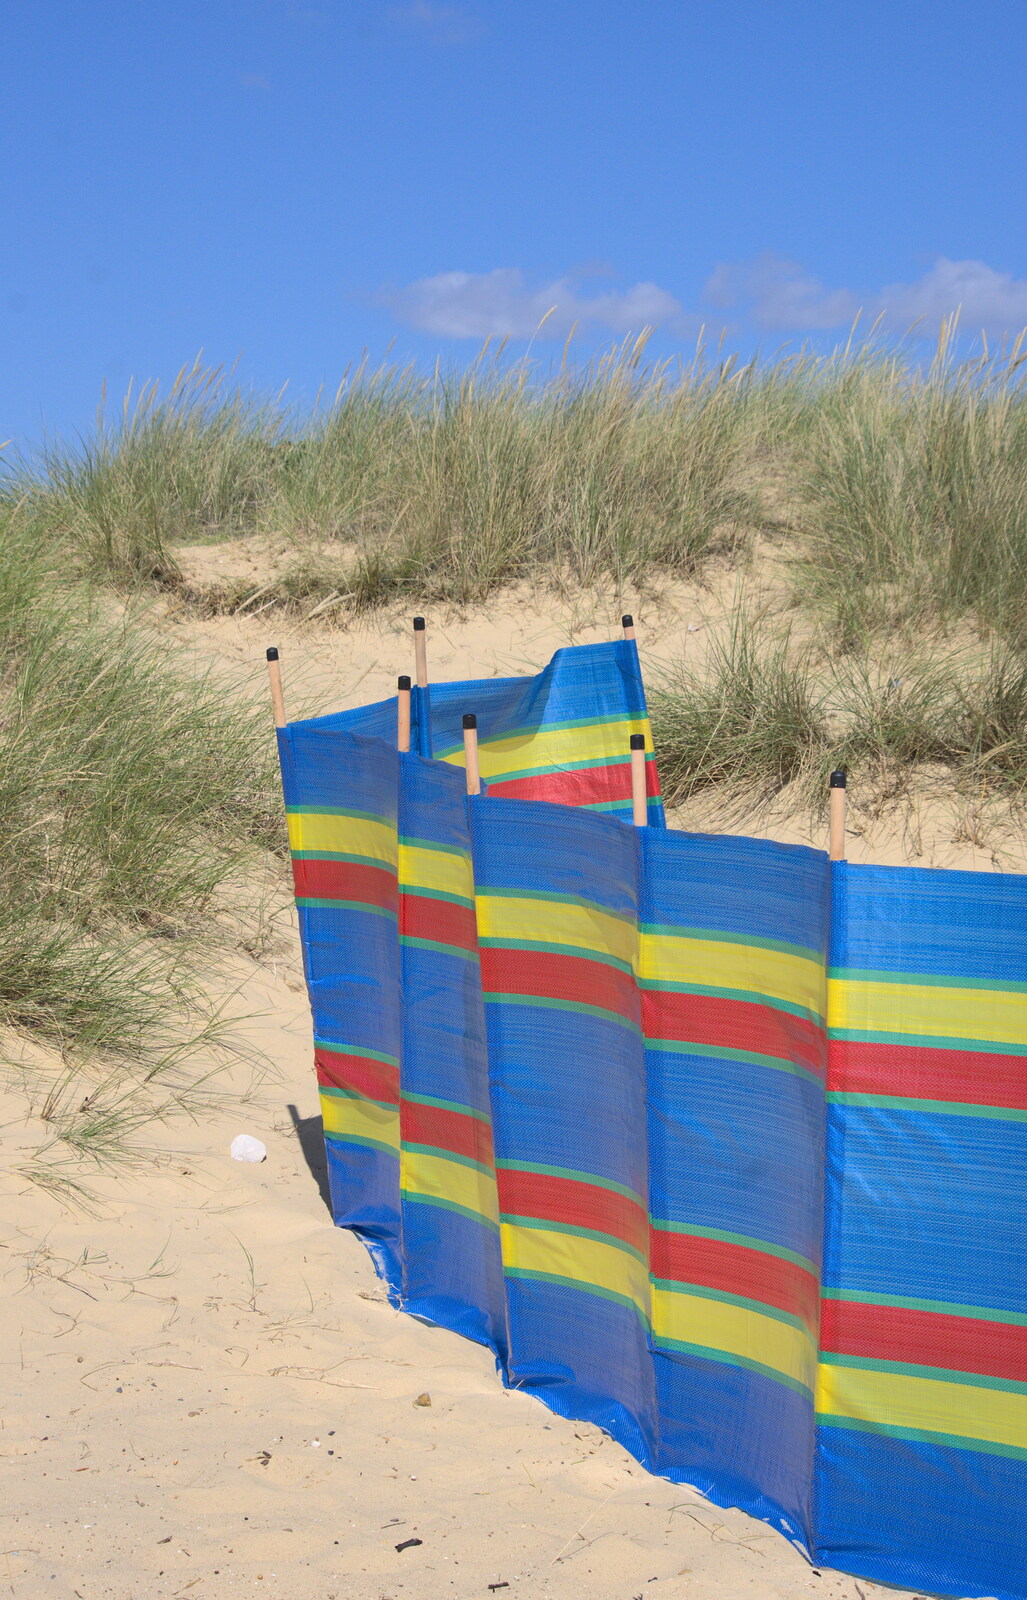 A much-needed windbreak from The Danger of Trees: A Camping (Mis)adventure - Southwold, Suffolk - 3rd August 2015